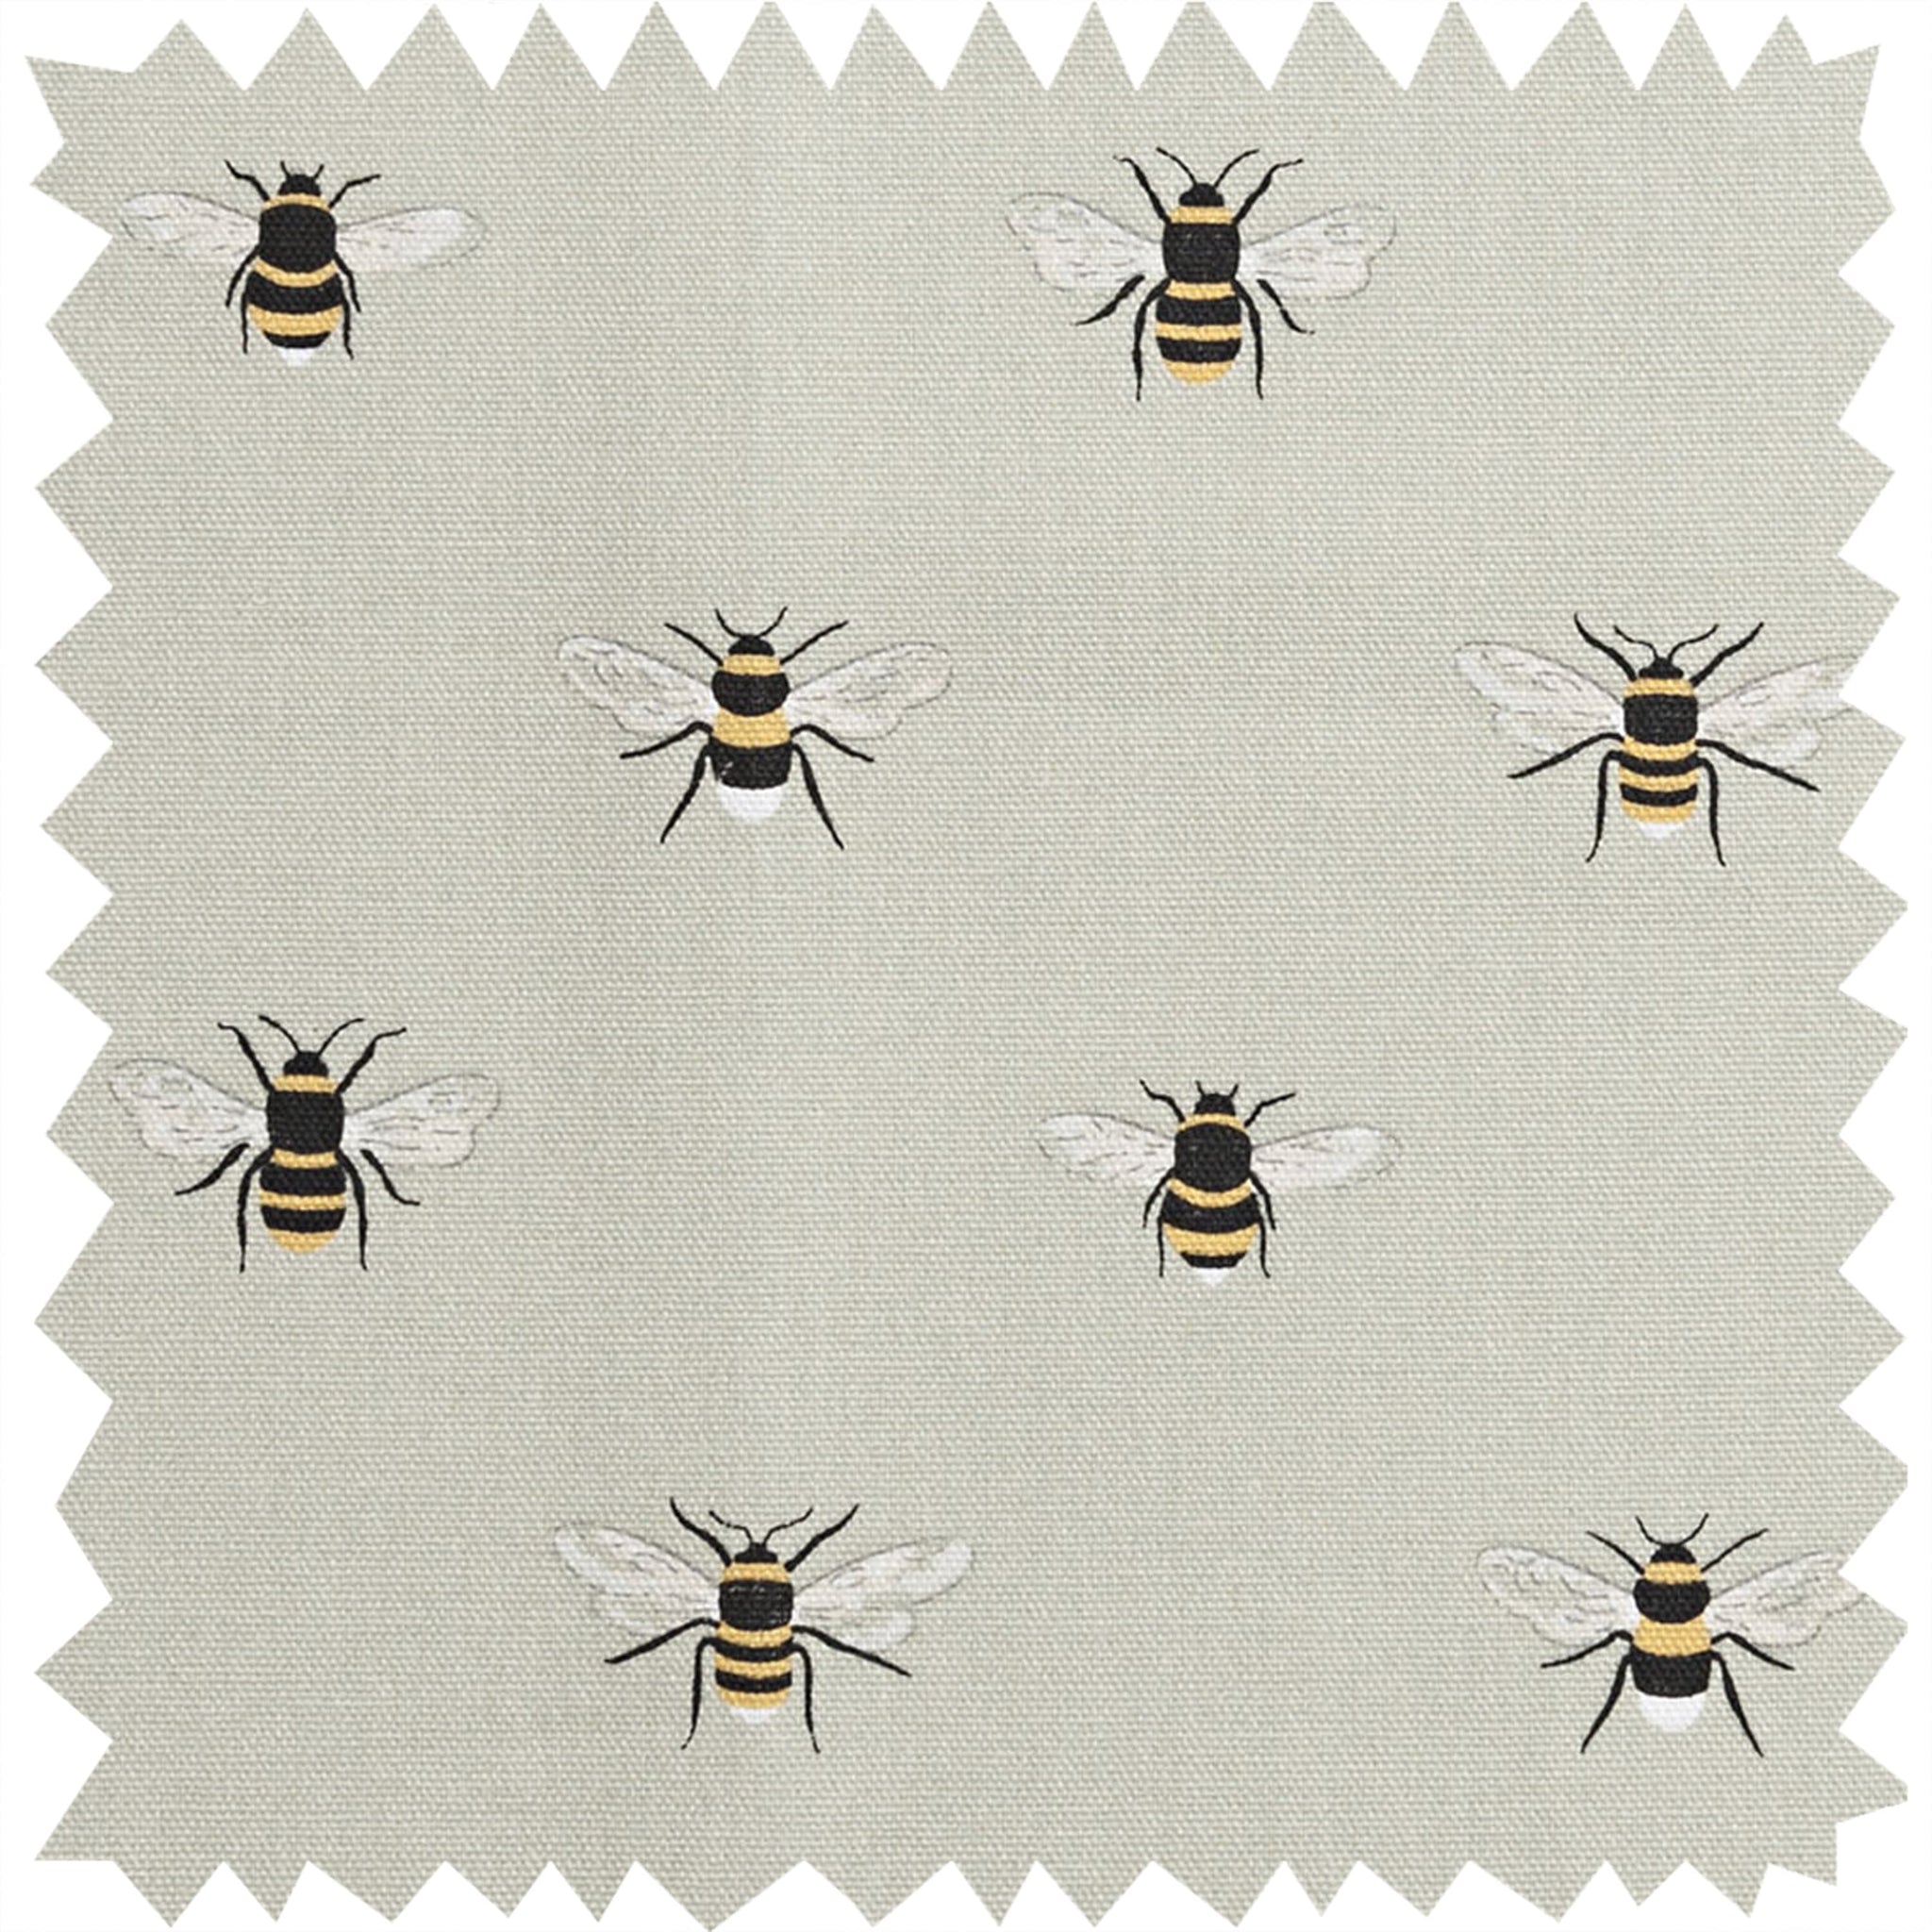 Bees Fabric Placemat